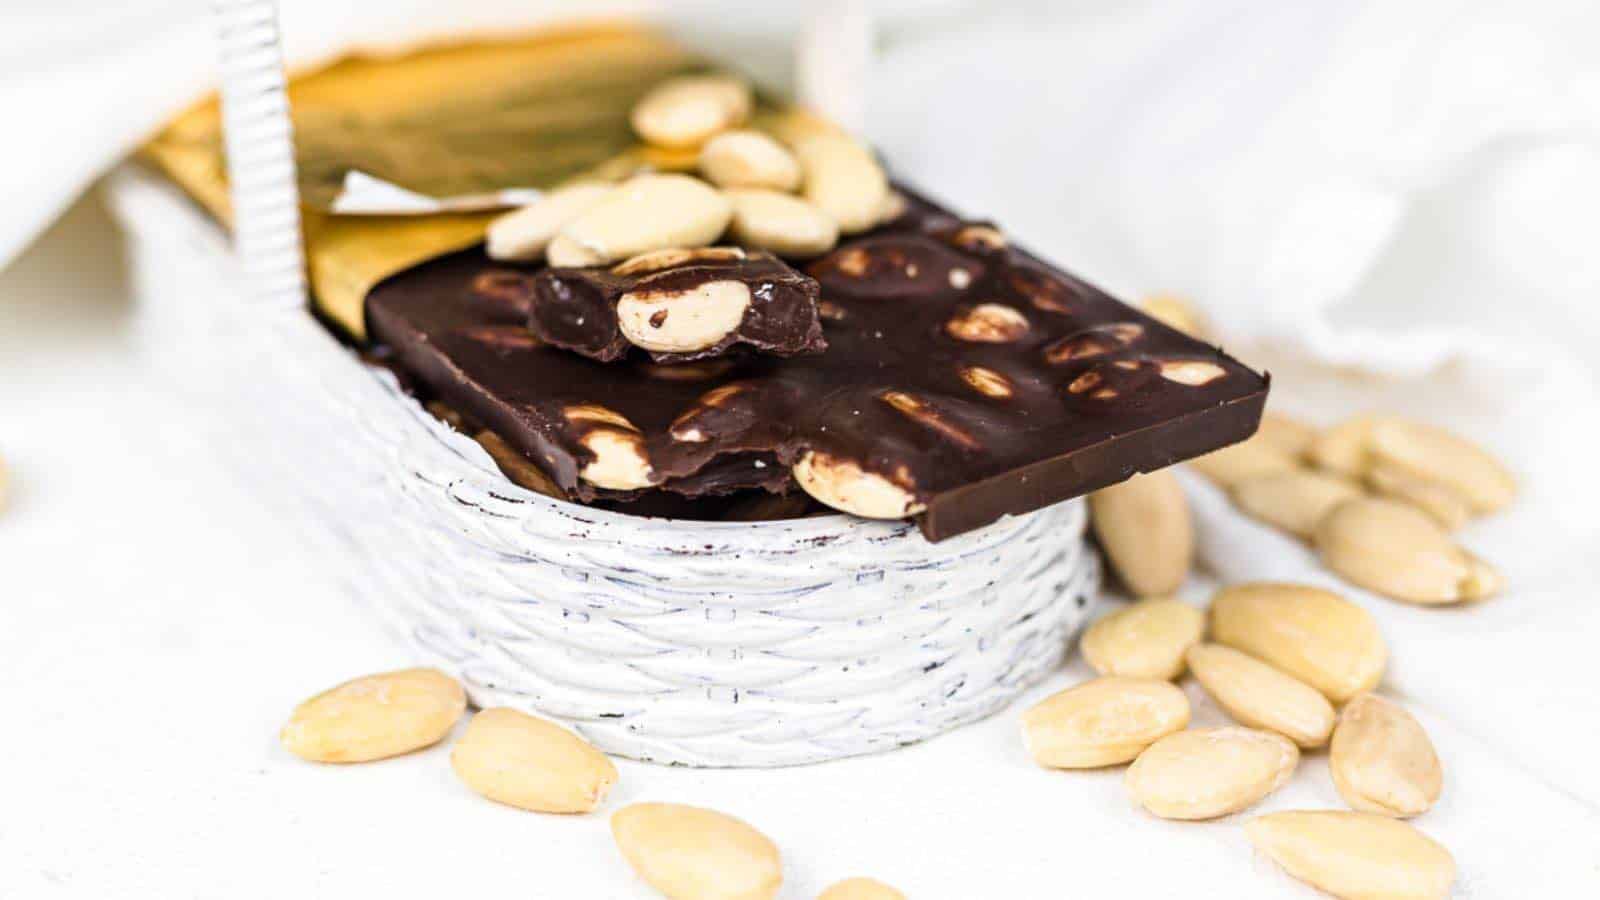 A bar of dark chocolate with nuts inside a small white woven basket, surrounded by scattered almonds on a white surface.